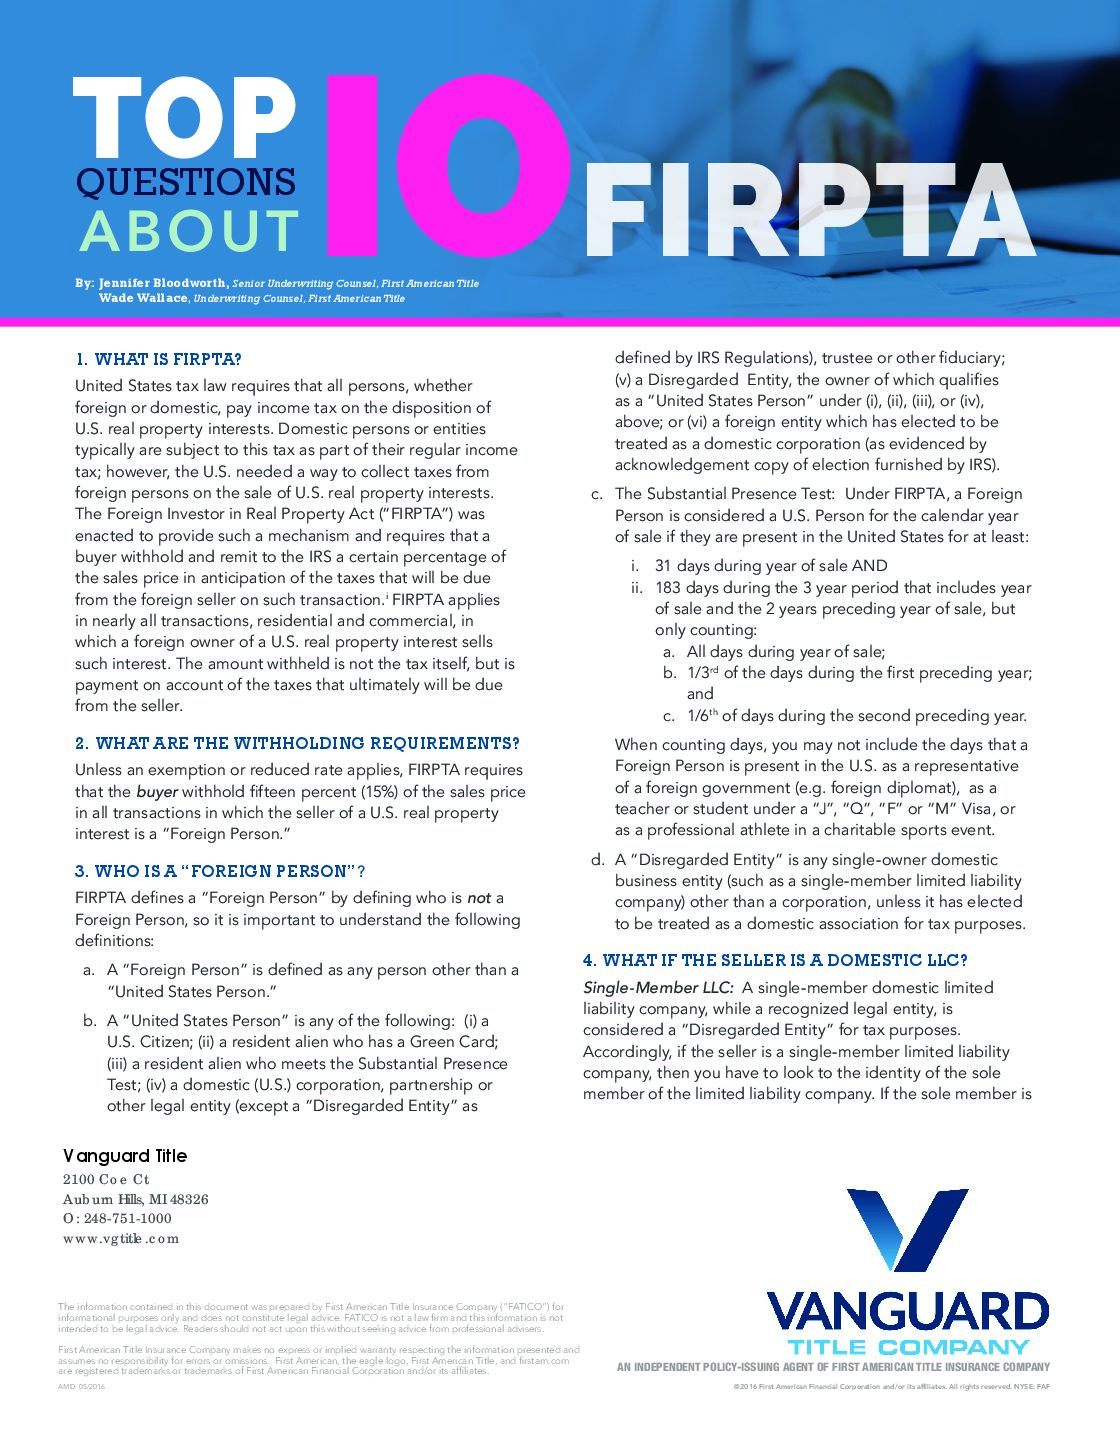 FIRPTA Questions Answered!